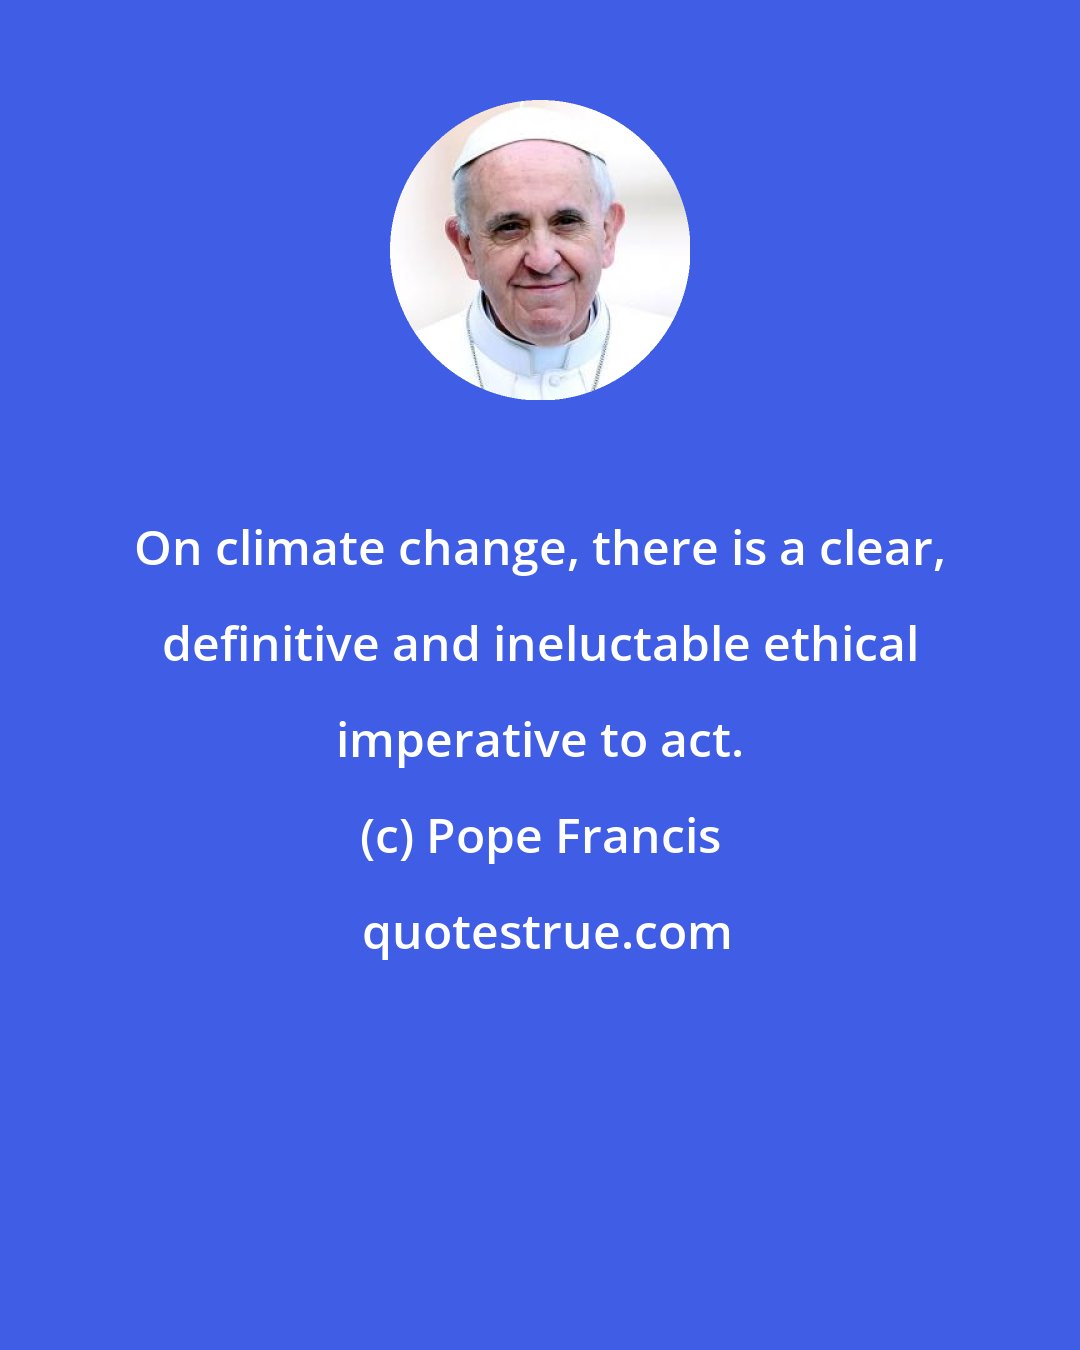 Pope Francis: On climate change, there is a clear, definitive and ineluctable ethical imperative to act.